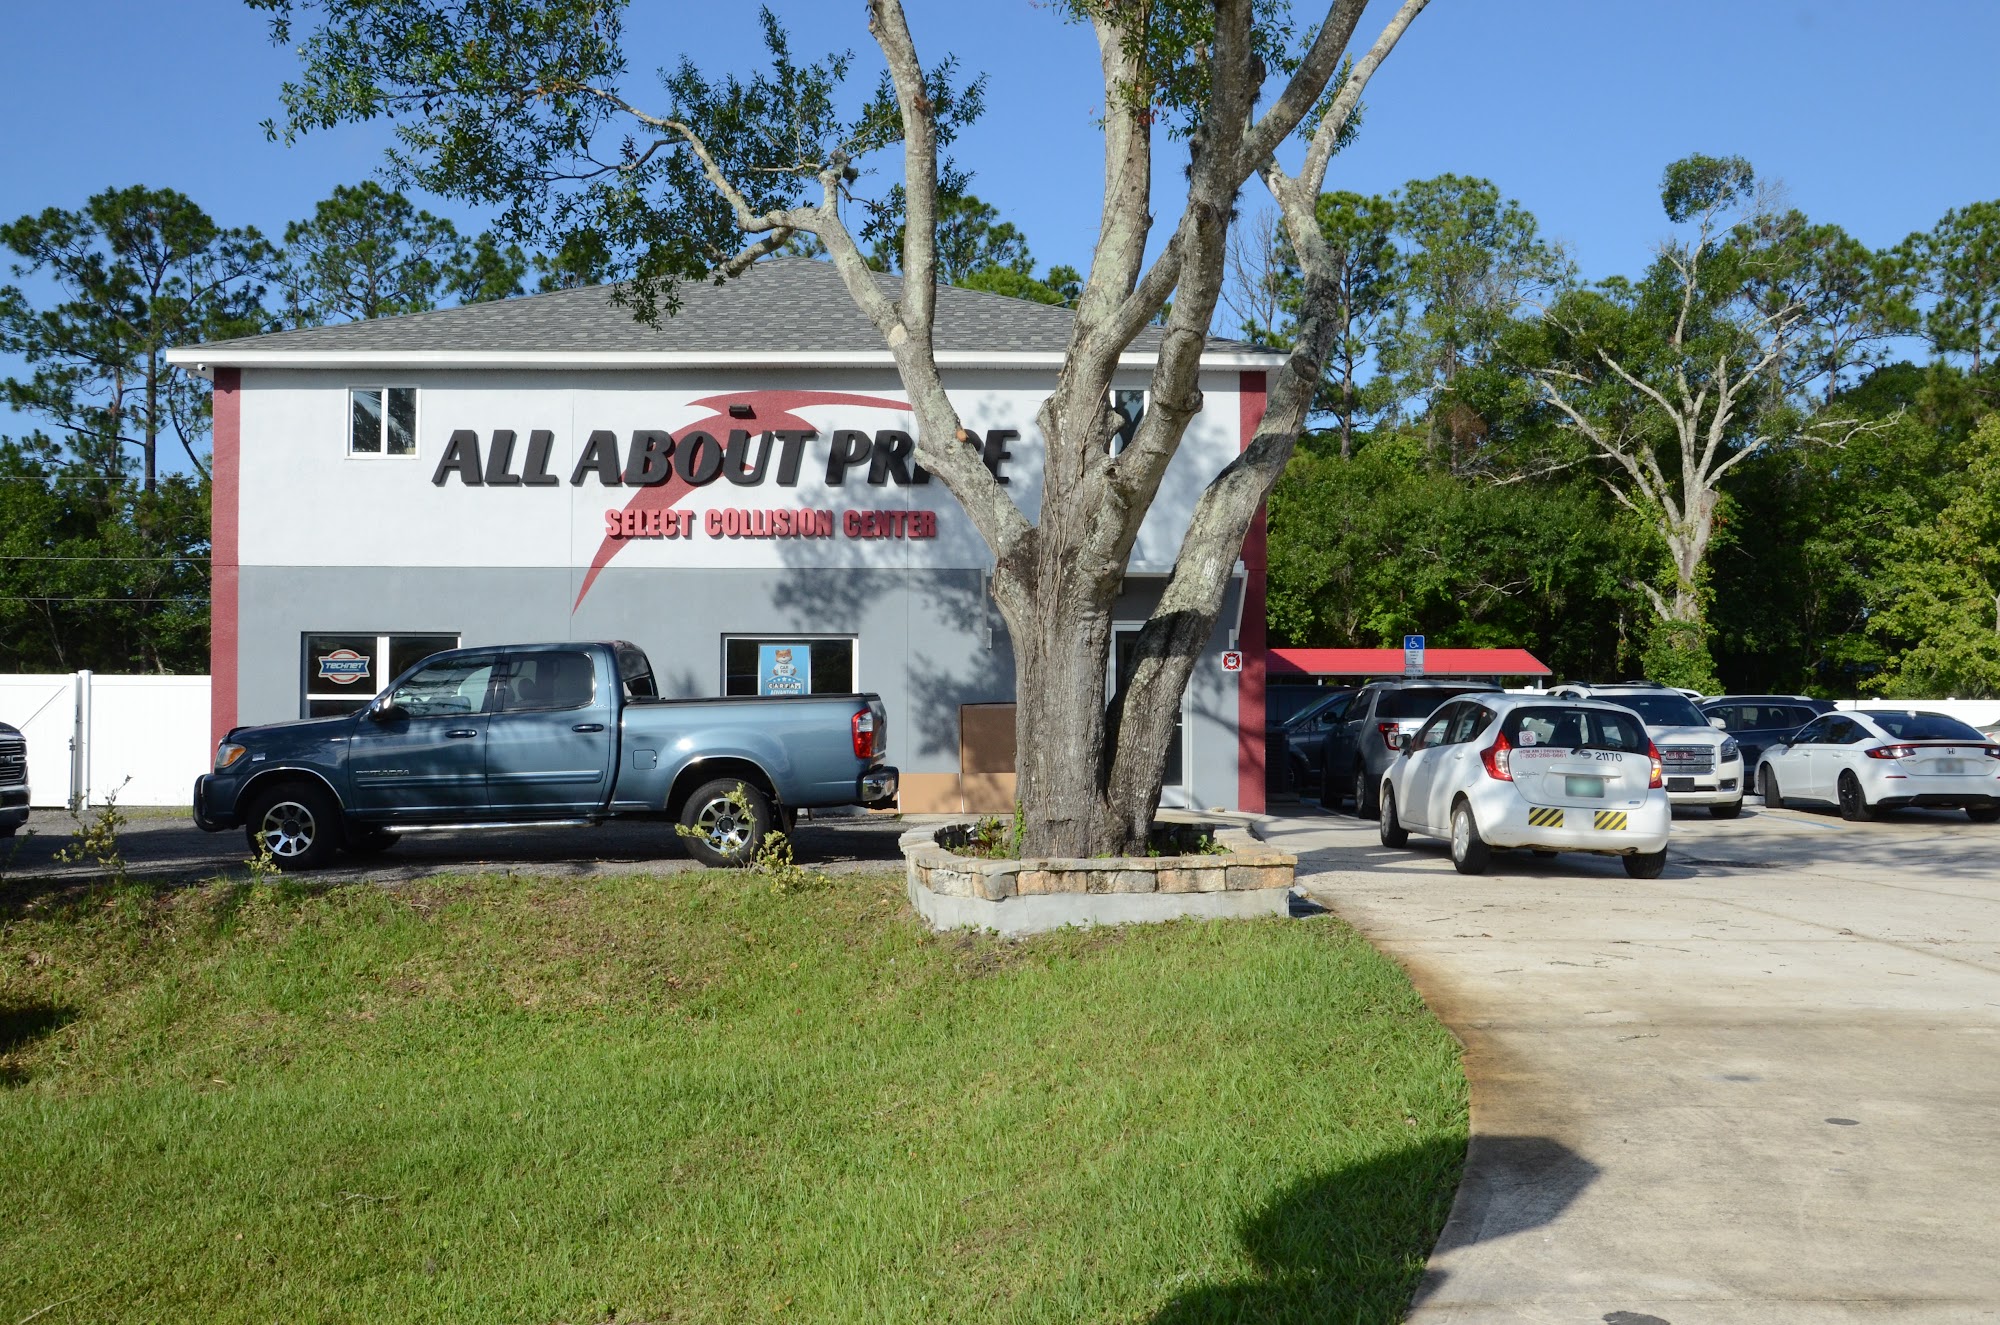 All About Price & Select Collision Center